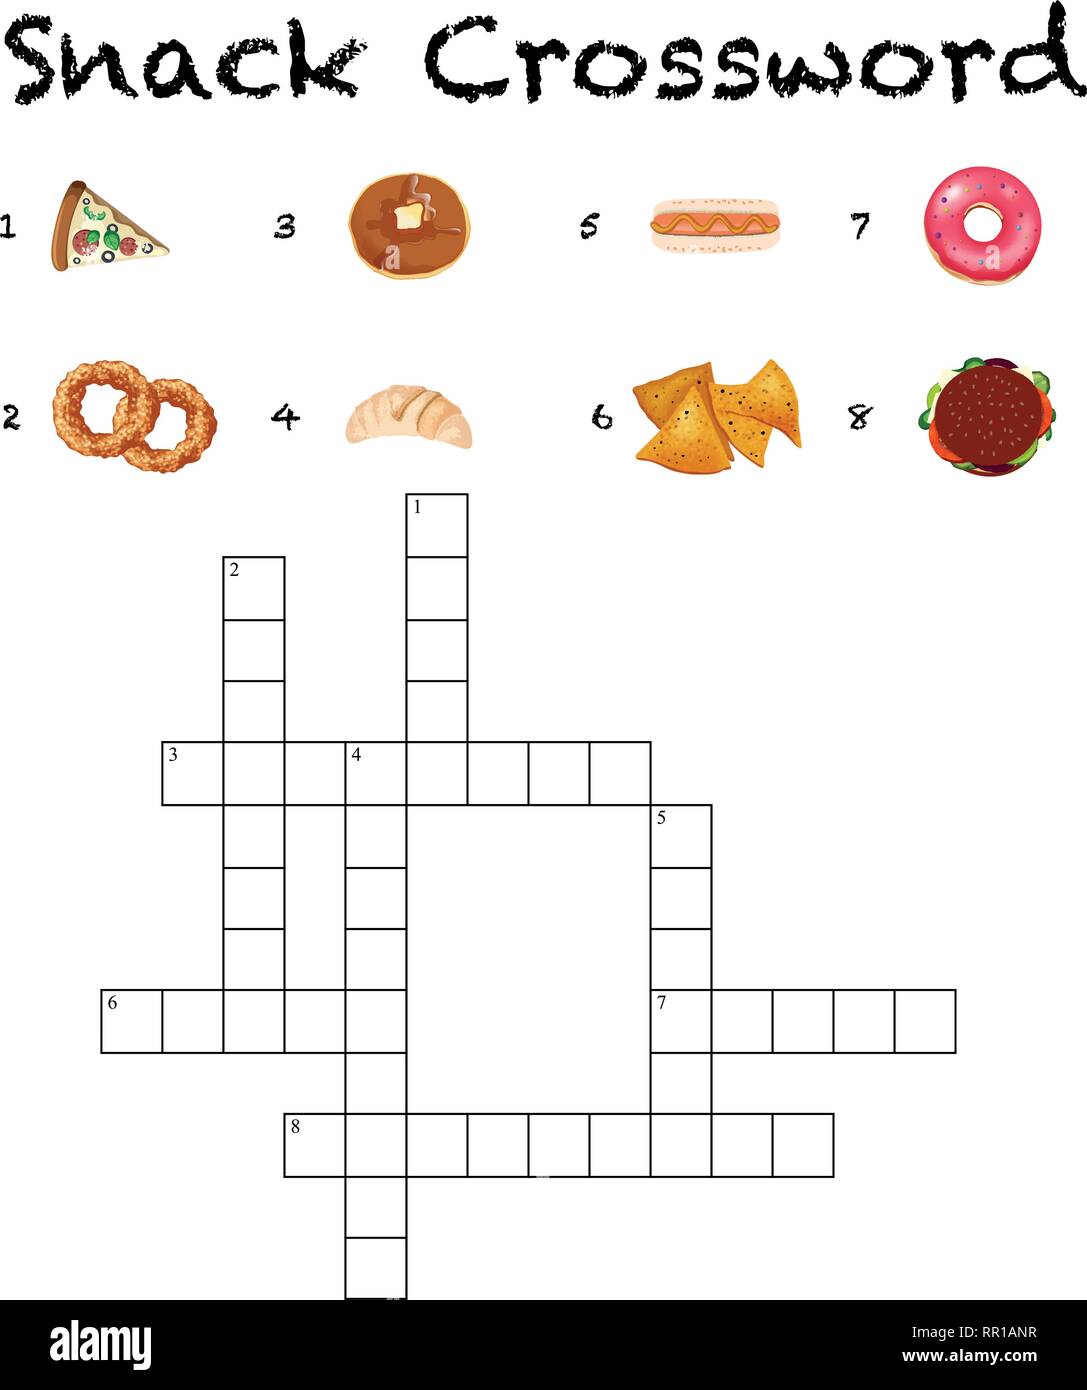 Crossword game food Stock Vector Images - Alamy